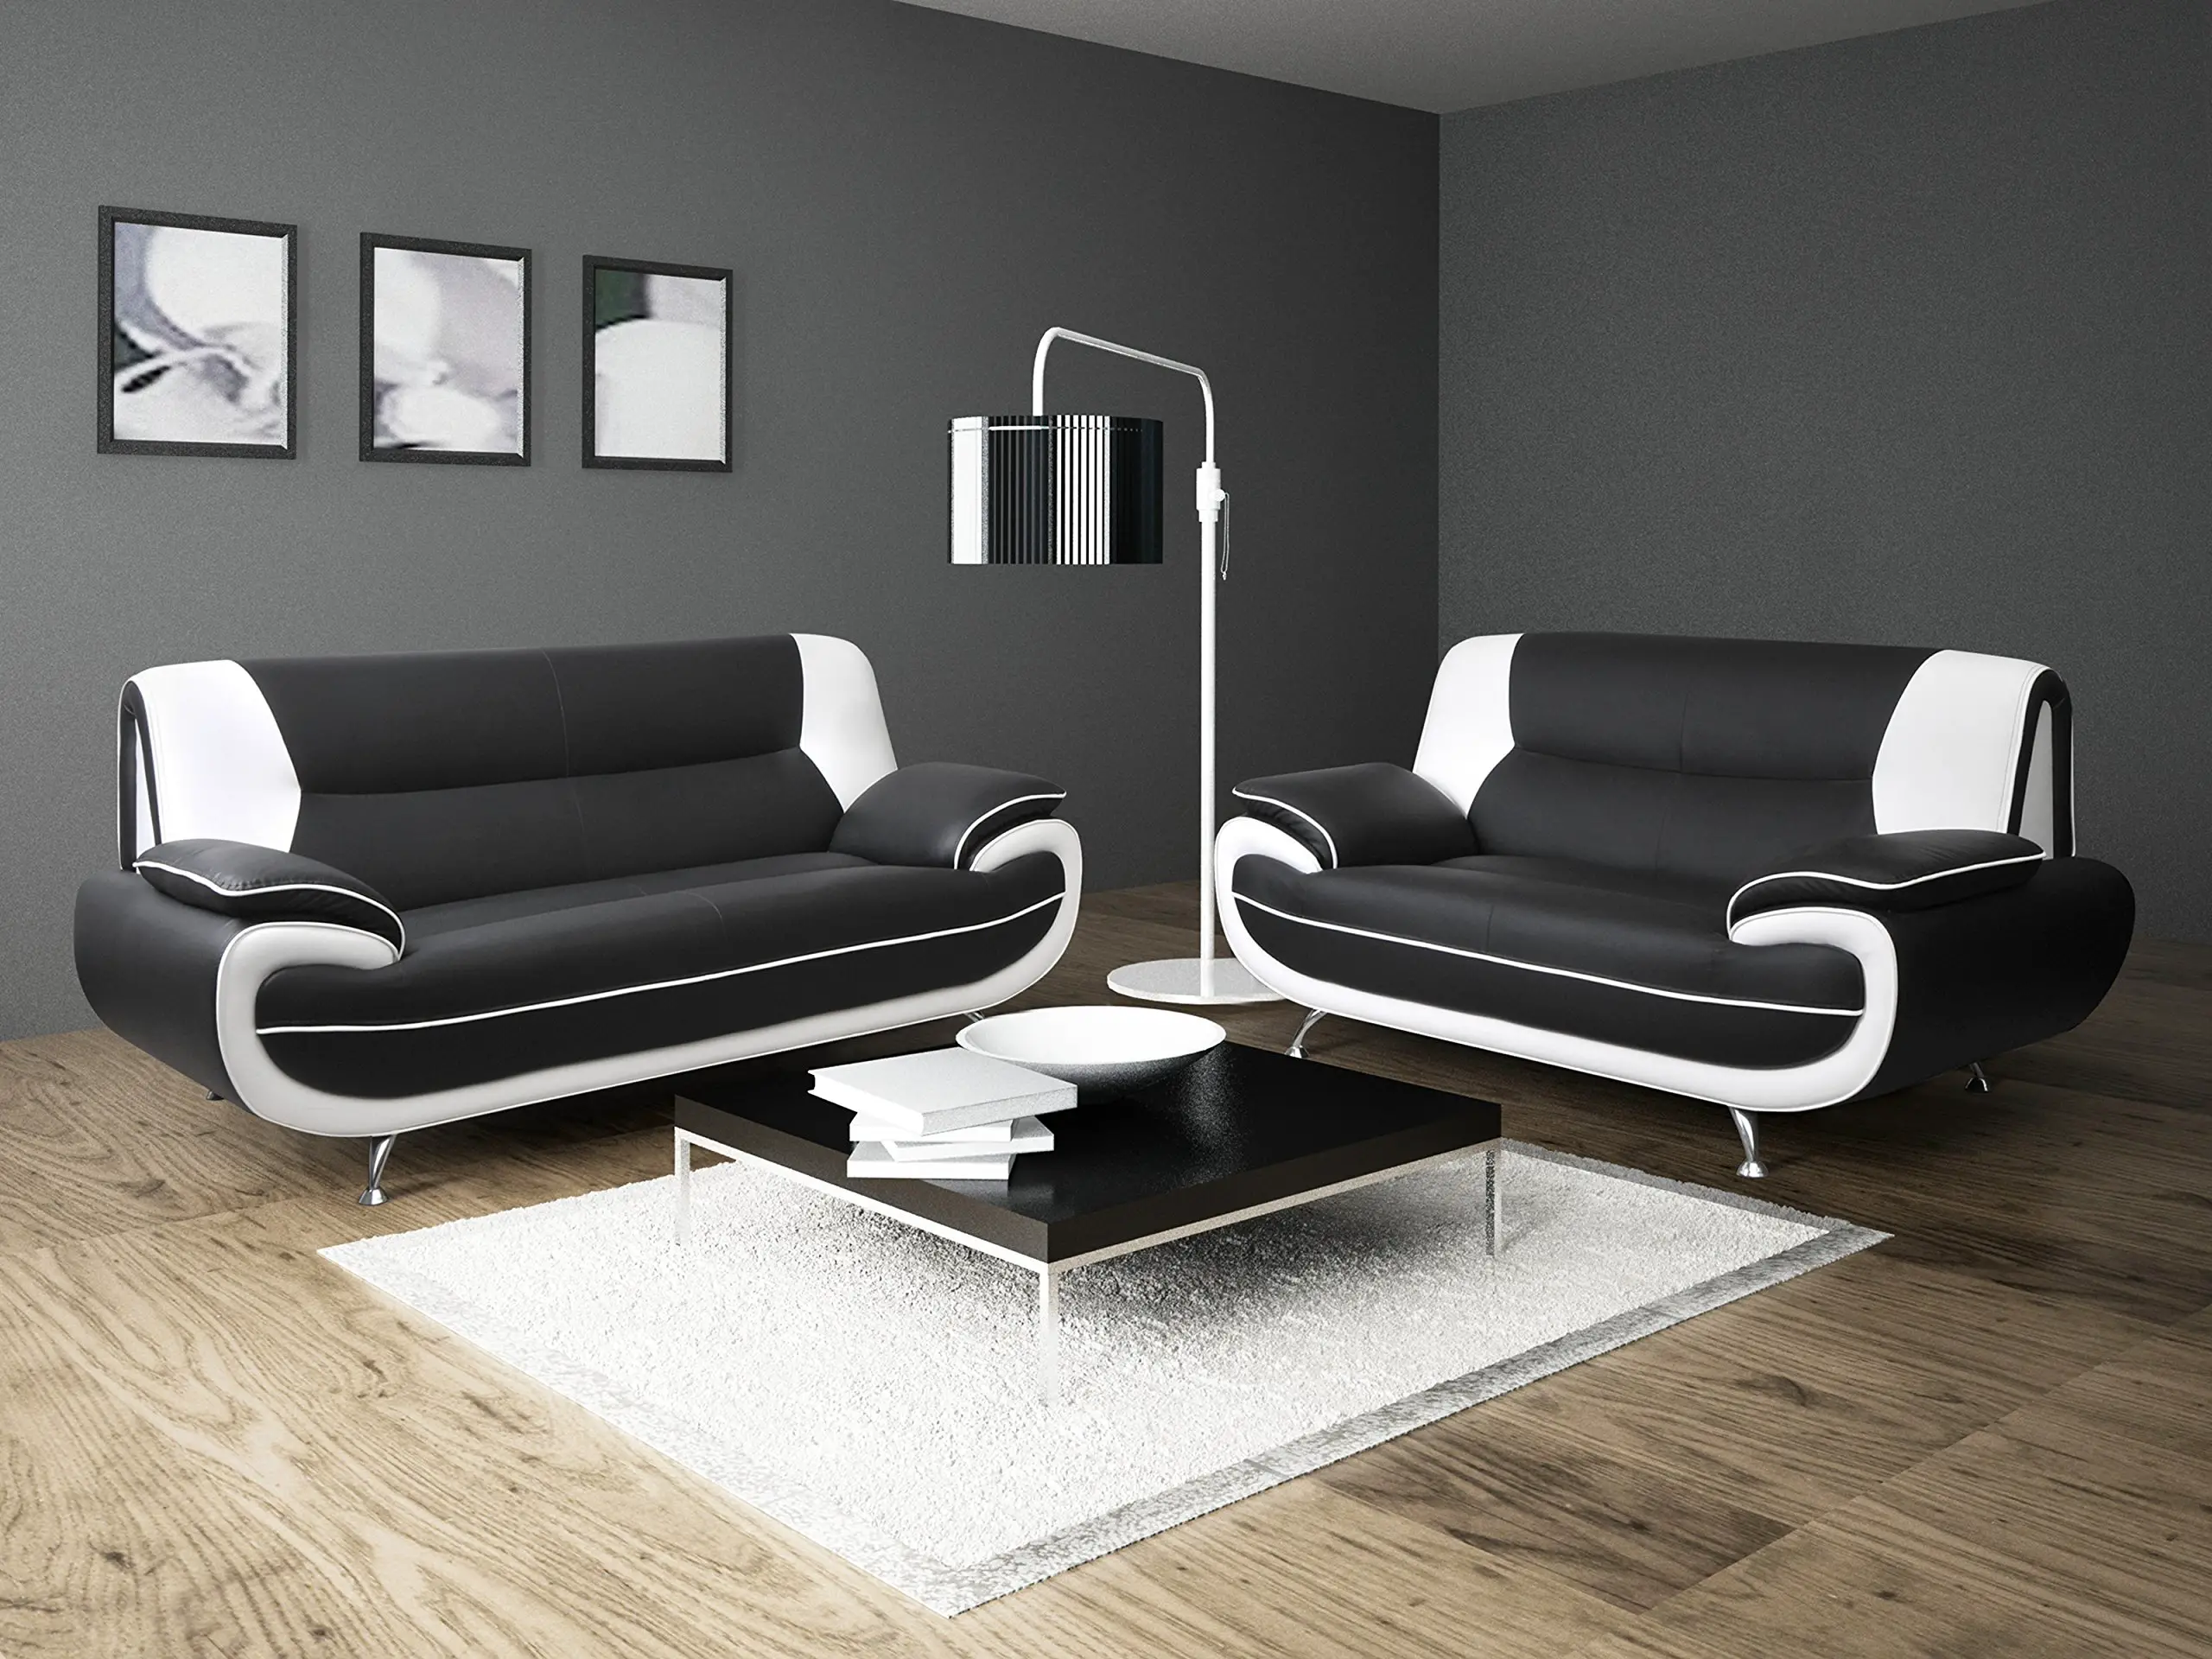 Are White or Black Leather Couches Better